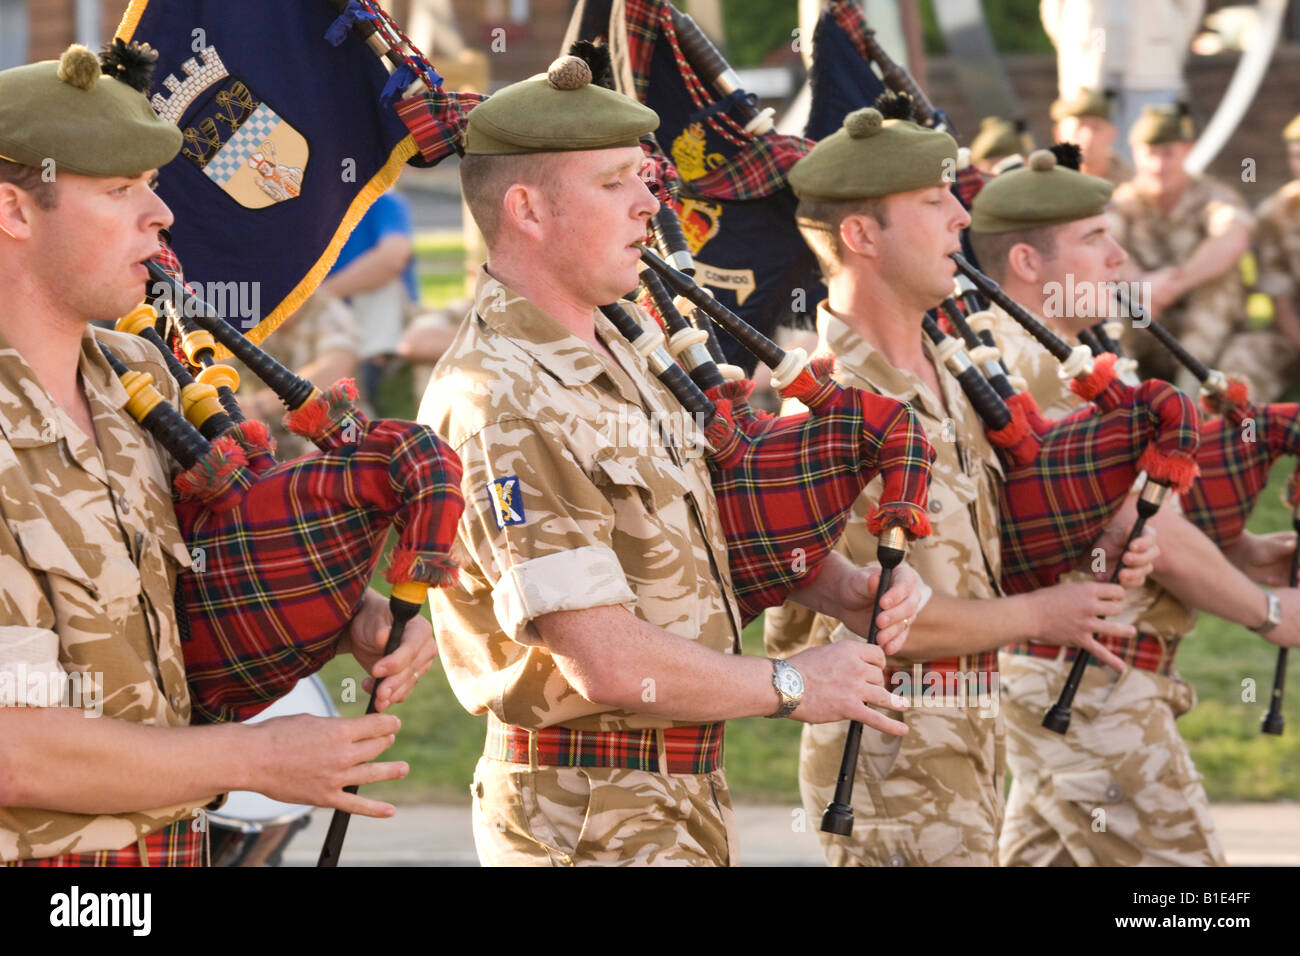 Military band bagpipers Scottish soldiers playing pipes Stock Photo